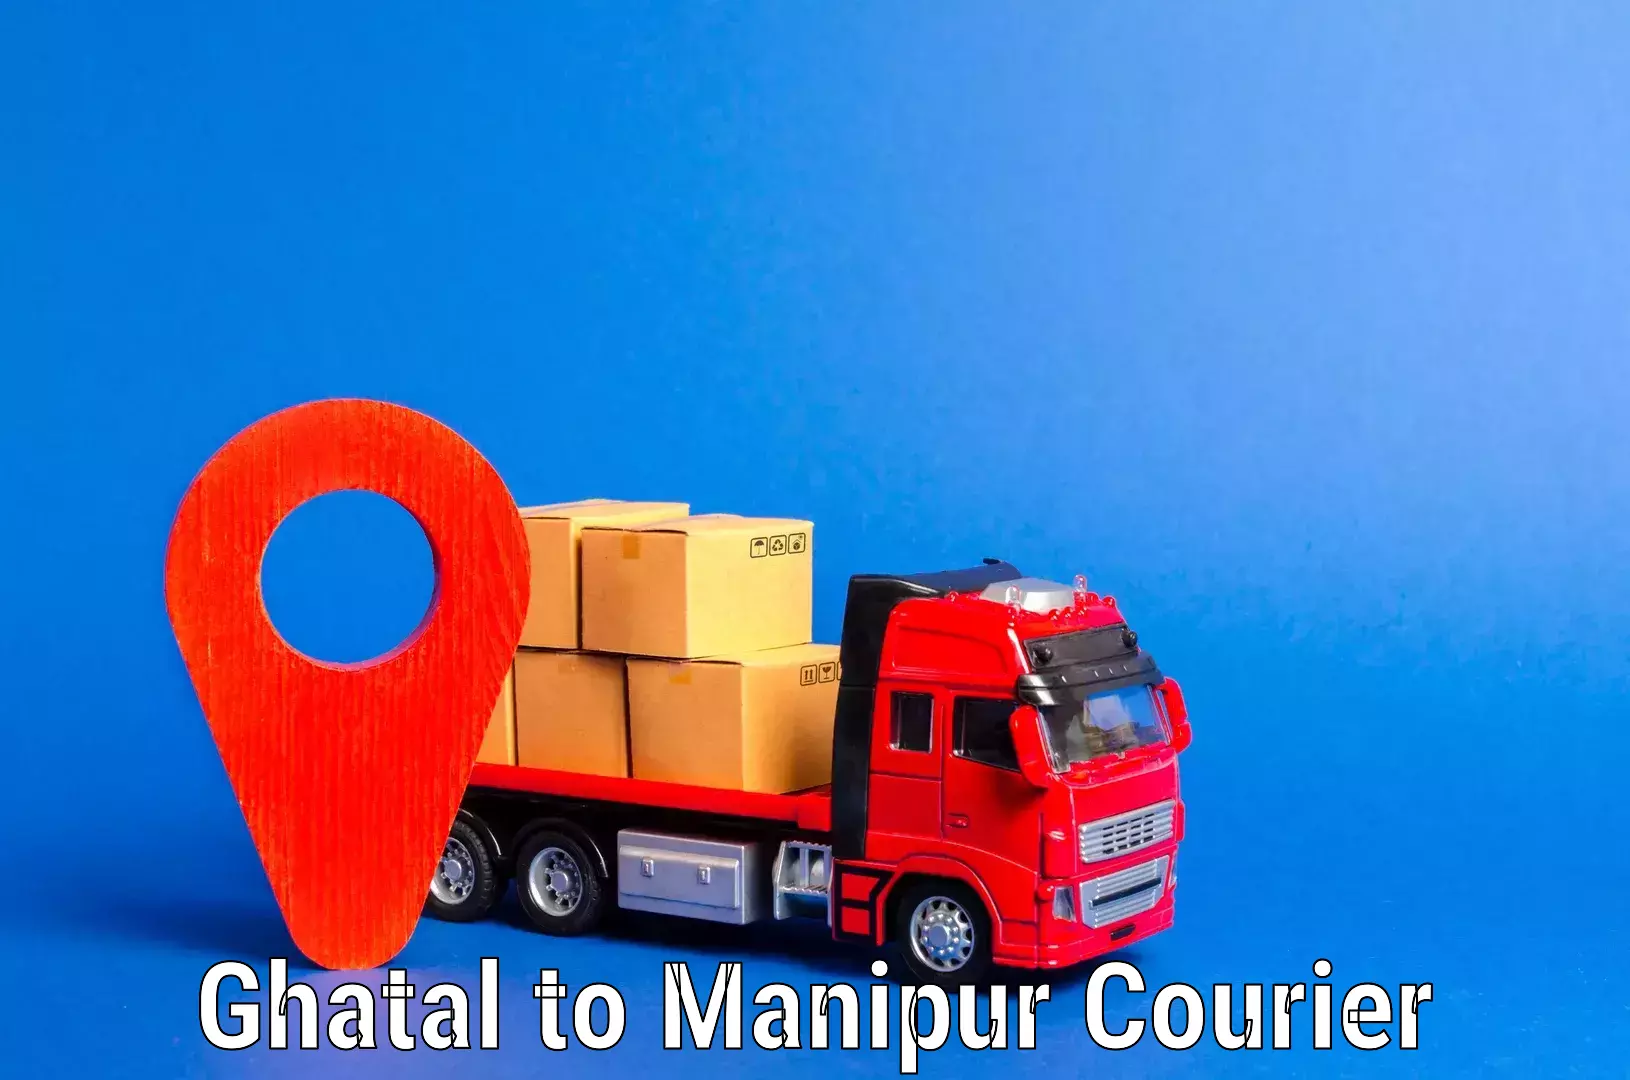 Furniture delivery service Ghatal to Manipur